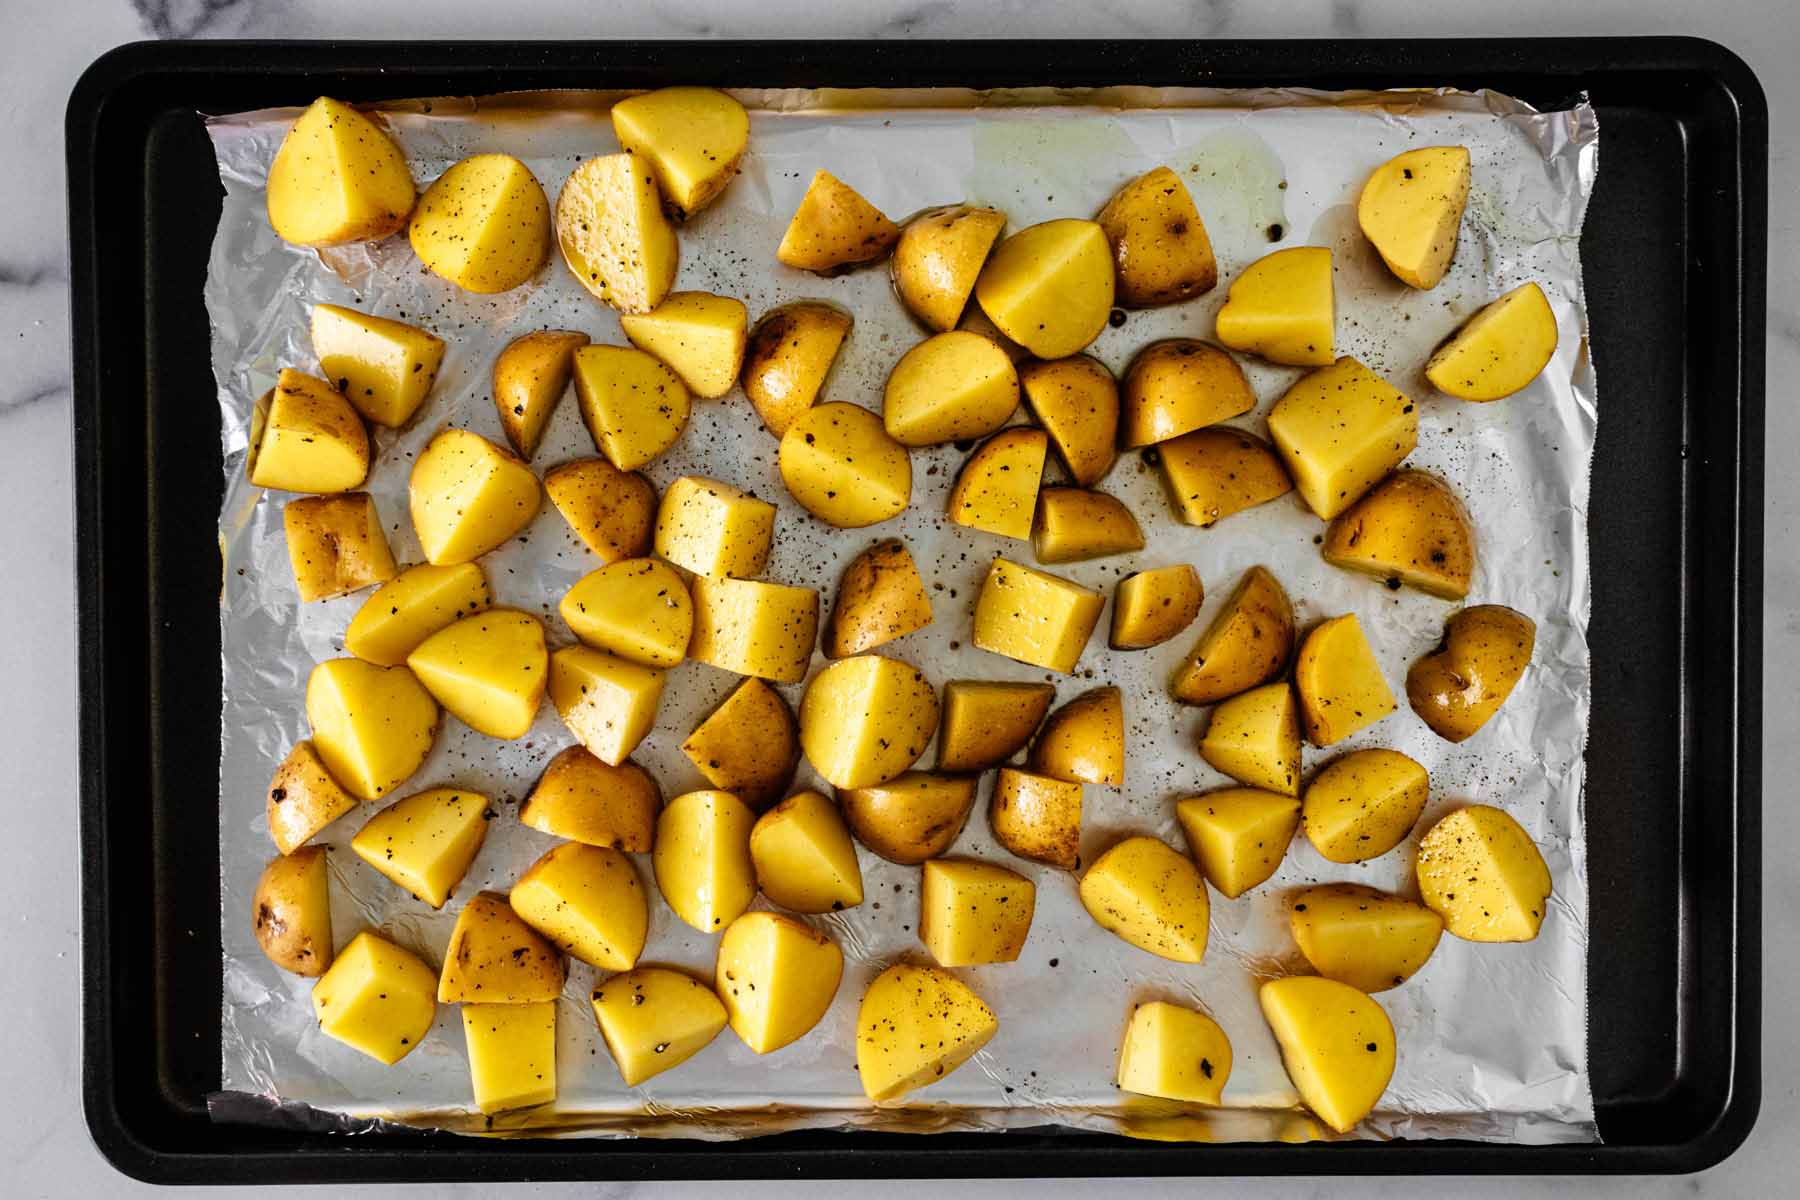 Chopped potatoes spread out onto a baking sheet lined with foil.